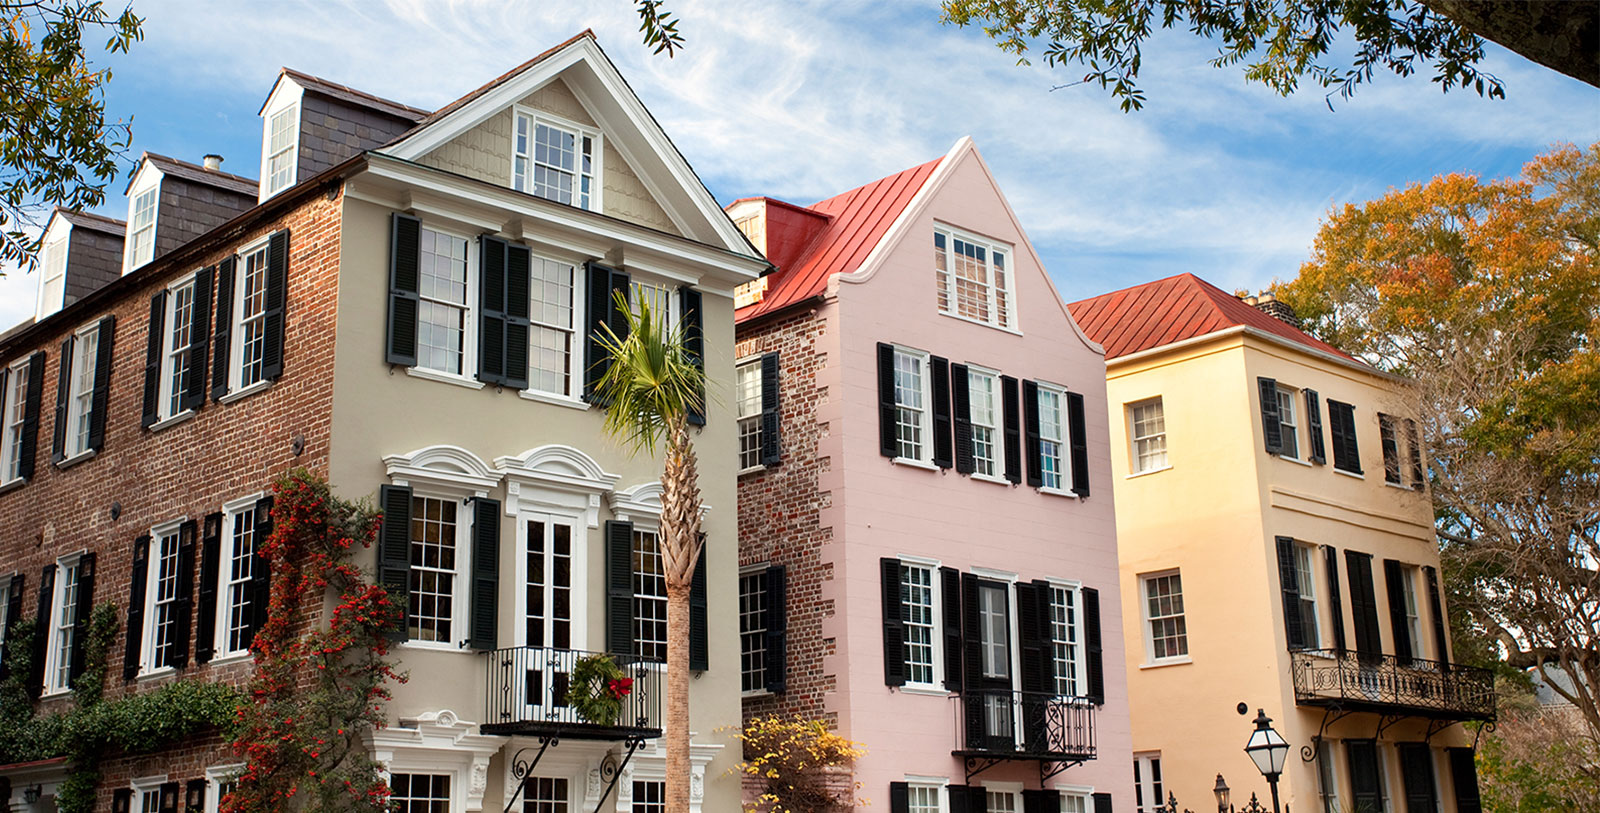 Explore the Charleston Museum and learn more about this fascinating city's long history.